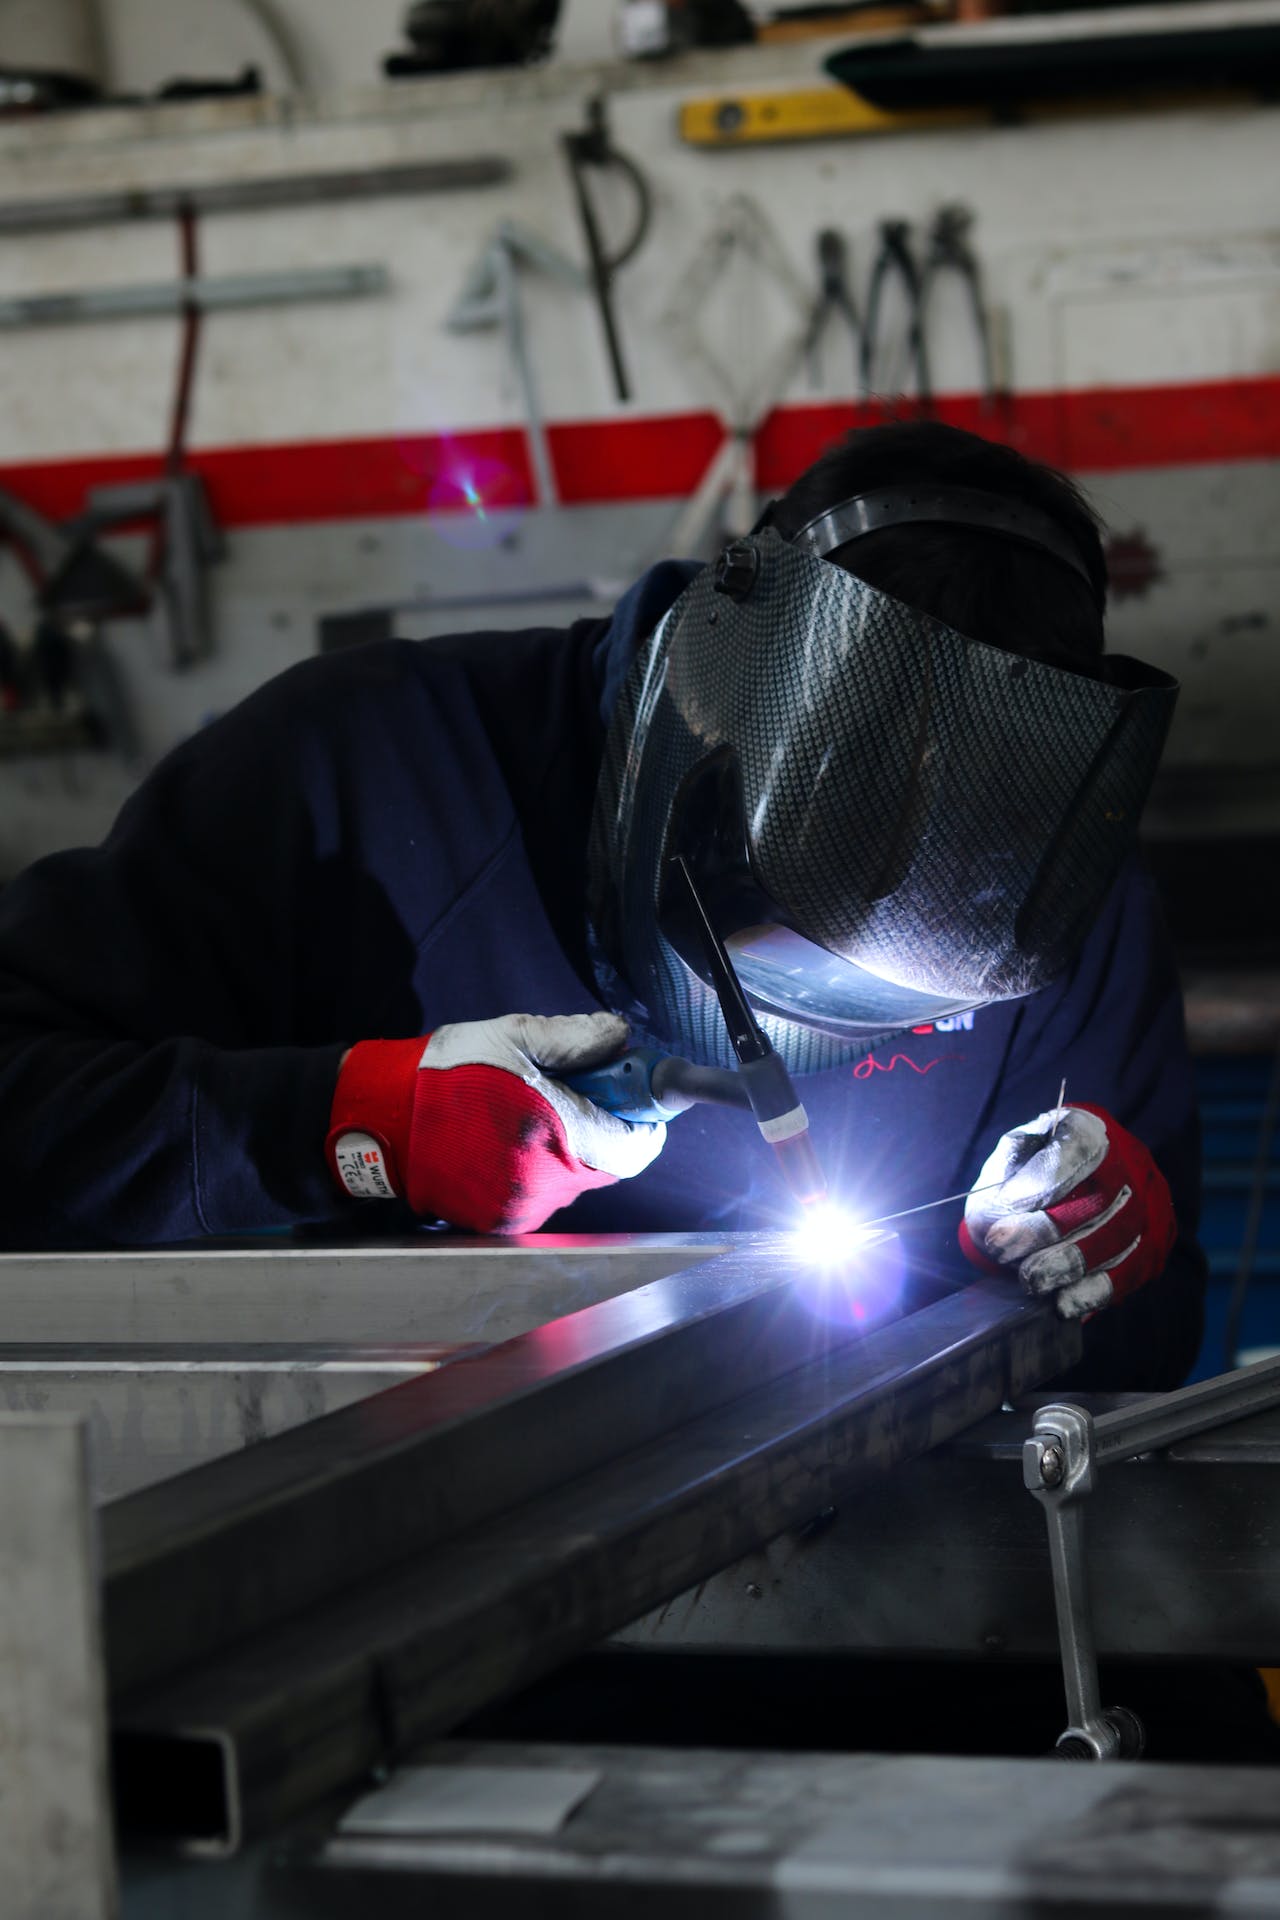 A man carry out his manufacturing job in his career as a welder